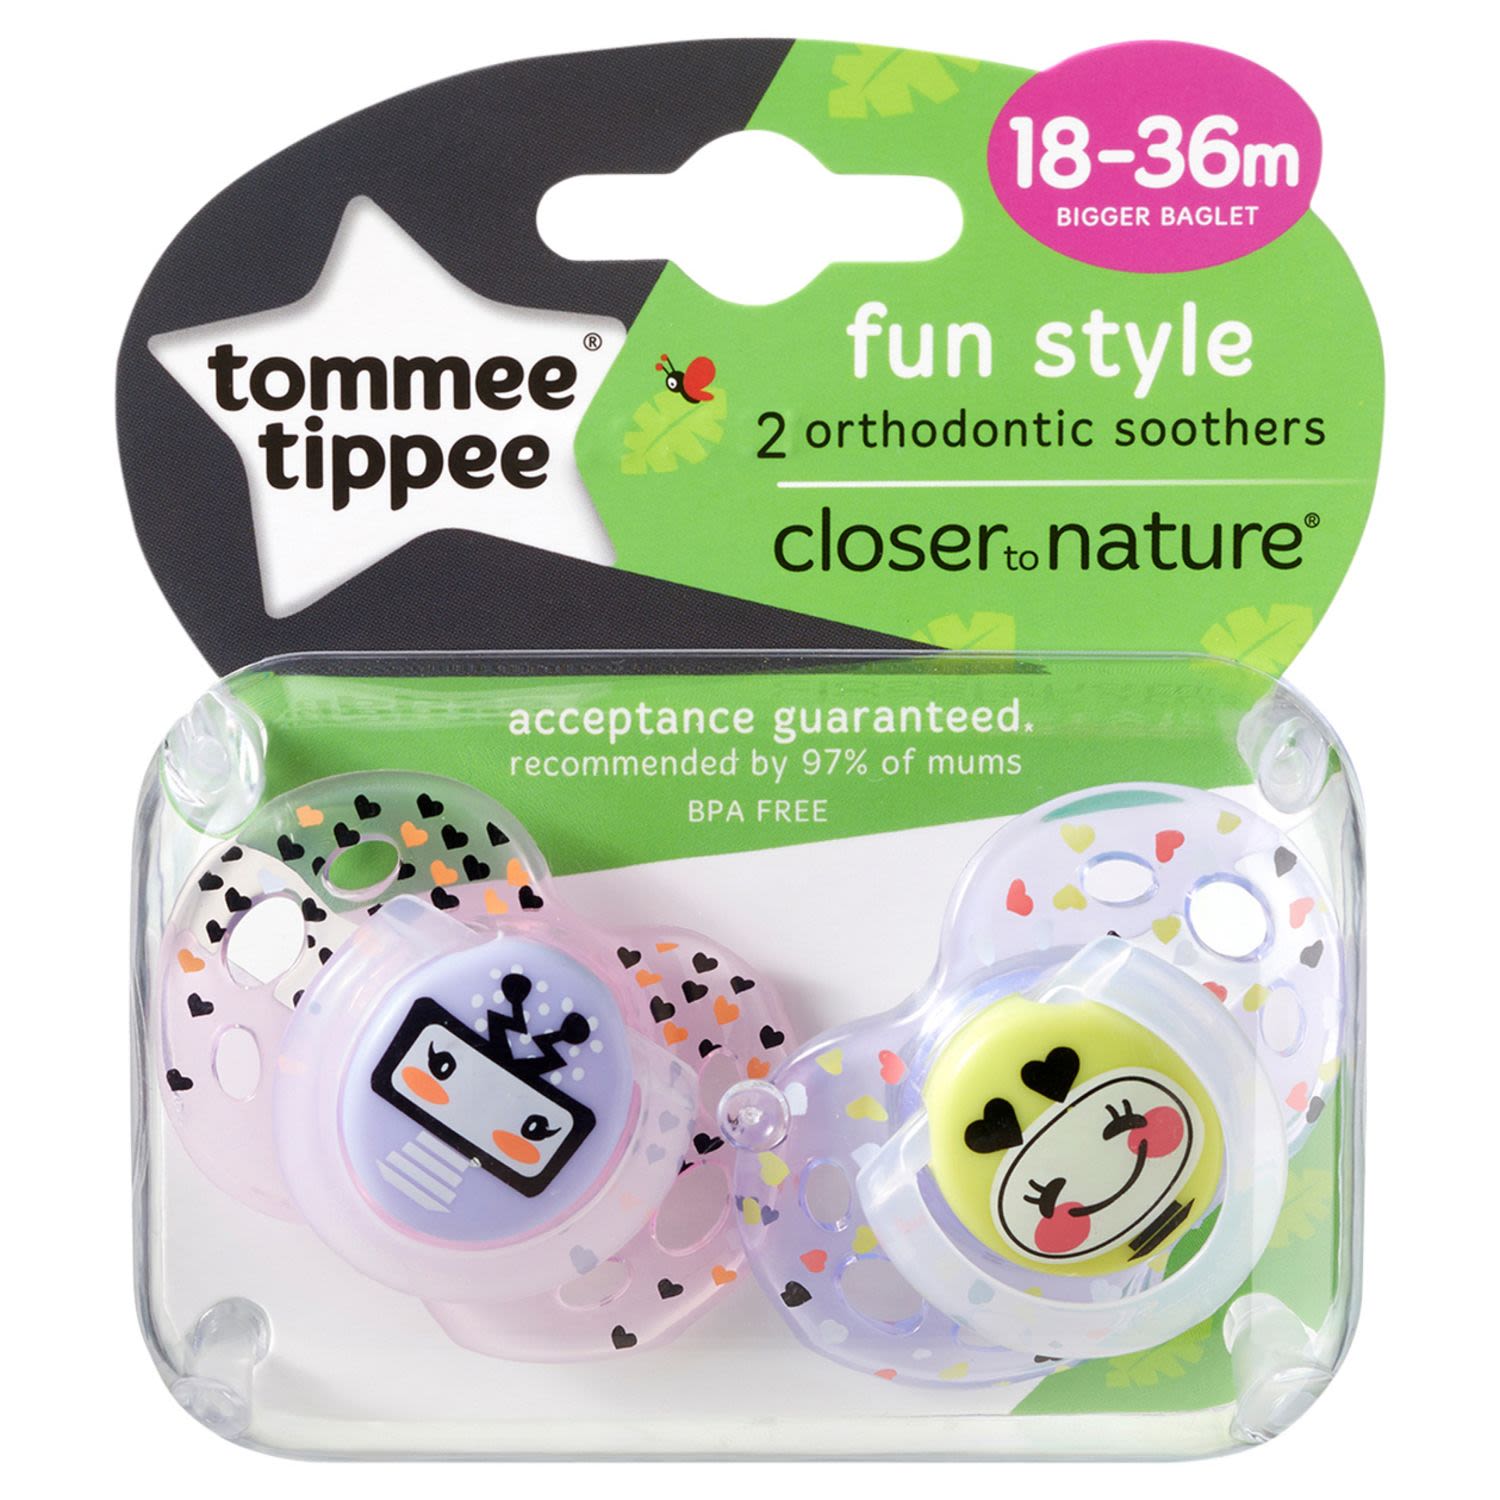 Tommee Tippee Closer to Nature Fun Style Soothers 18-36 Months, 2 Each